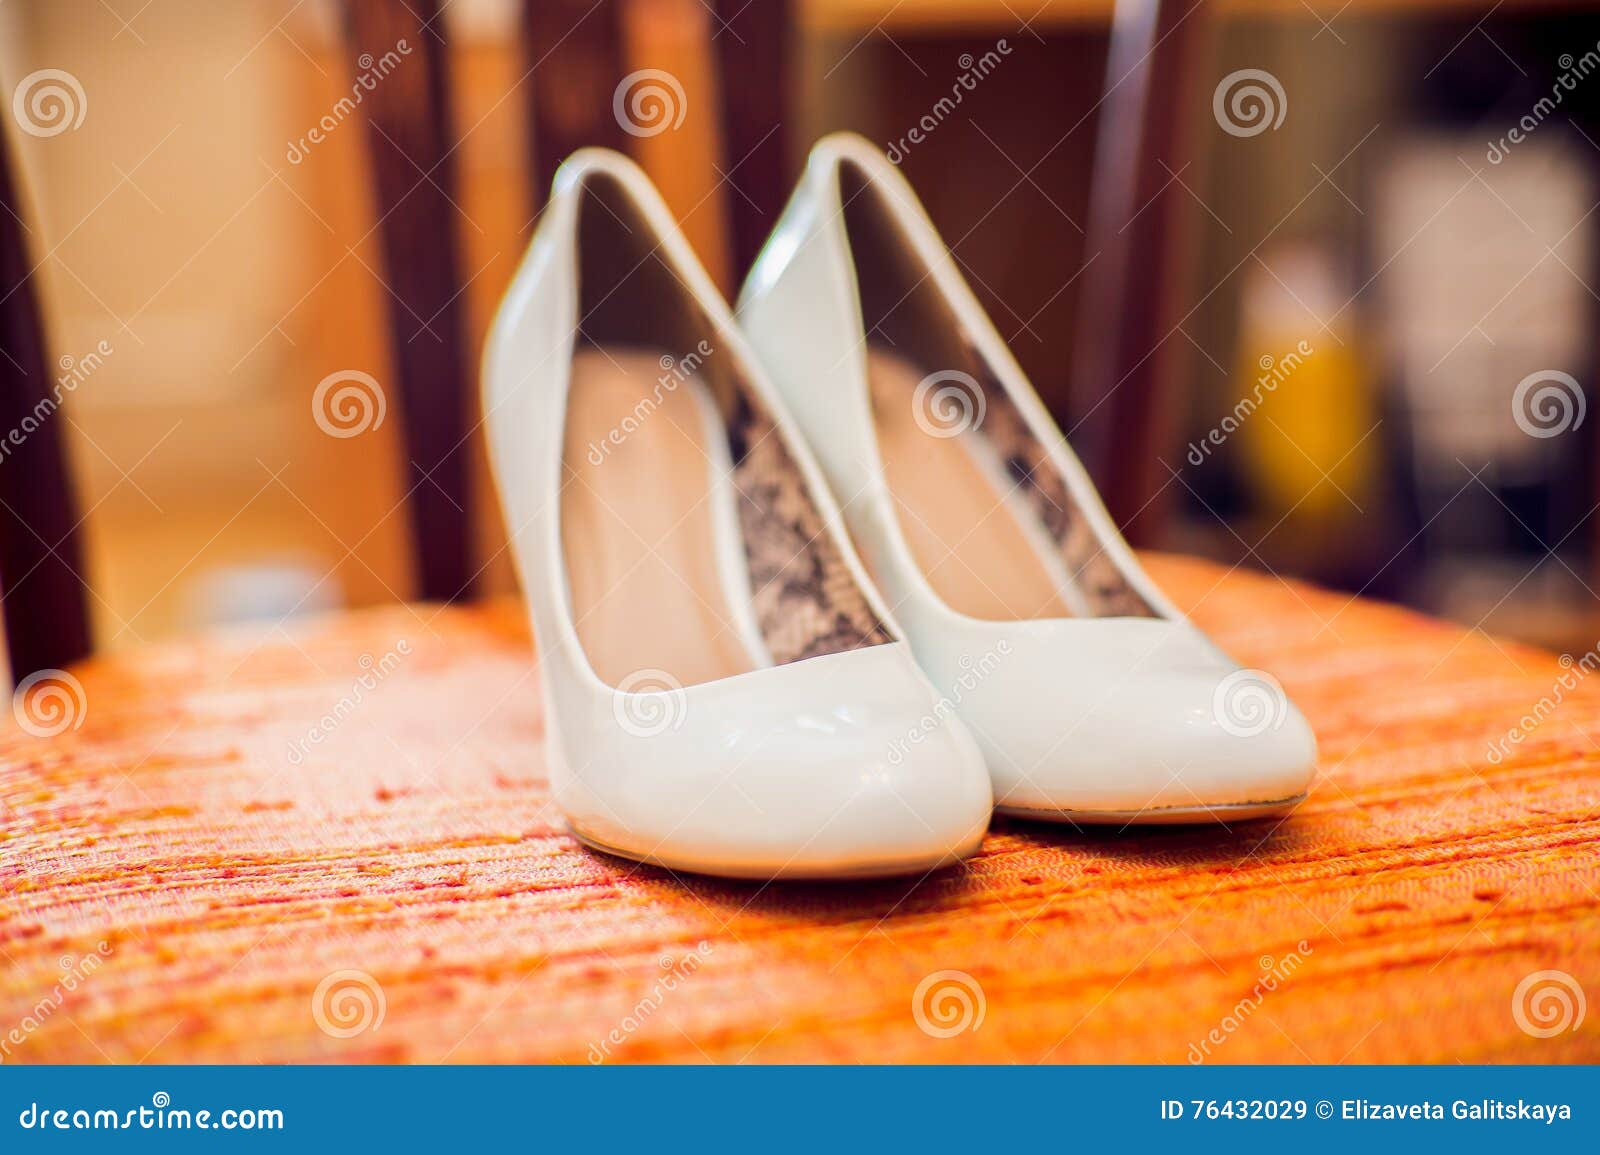 Wedding Shoes Cream Color On The Chair Stock Image Image